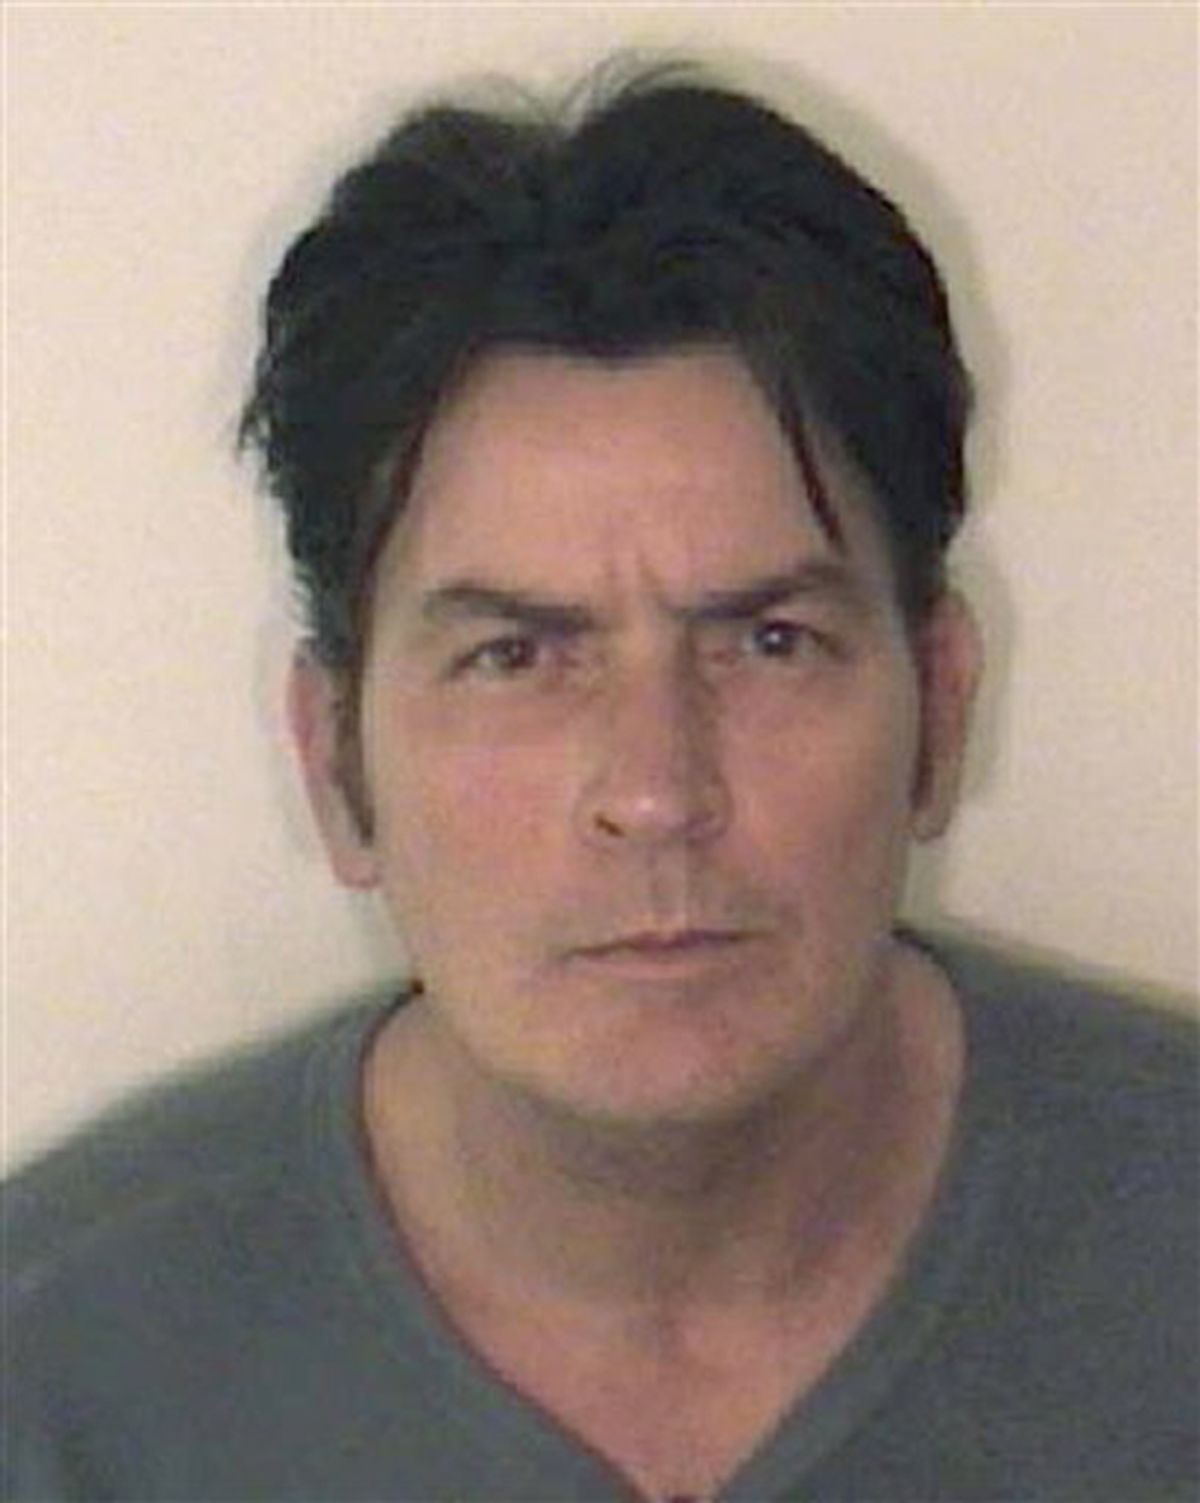 This picture provided by the Aspen Police Department on Friday, Dec. 25, 2009 shows Charlie Sheen. Sheen has been arrested in Aspen, Colo. on charges related to an alleged case of domestic violence. Authorities said Sheen was arrested Friday on charges of second-degree assault as well as menacing, both felonies, and criminal mischief, a misdemeanor. Police said the alleged victim didn't have to be taken to the hospital but didn't identify who the victim was. (AP Photo/Aspen Police Department) (AP)